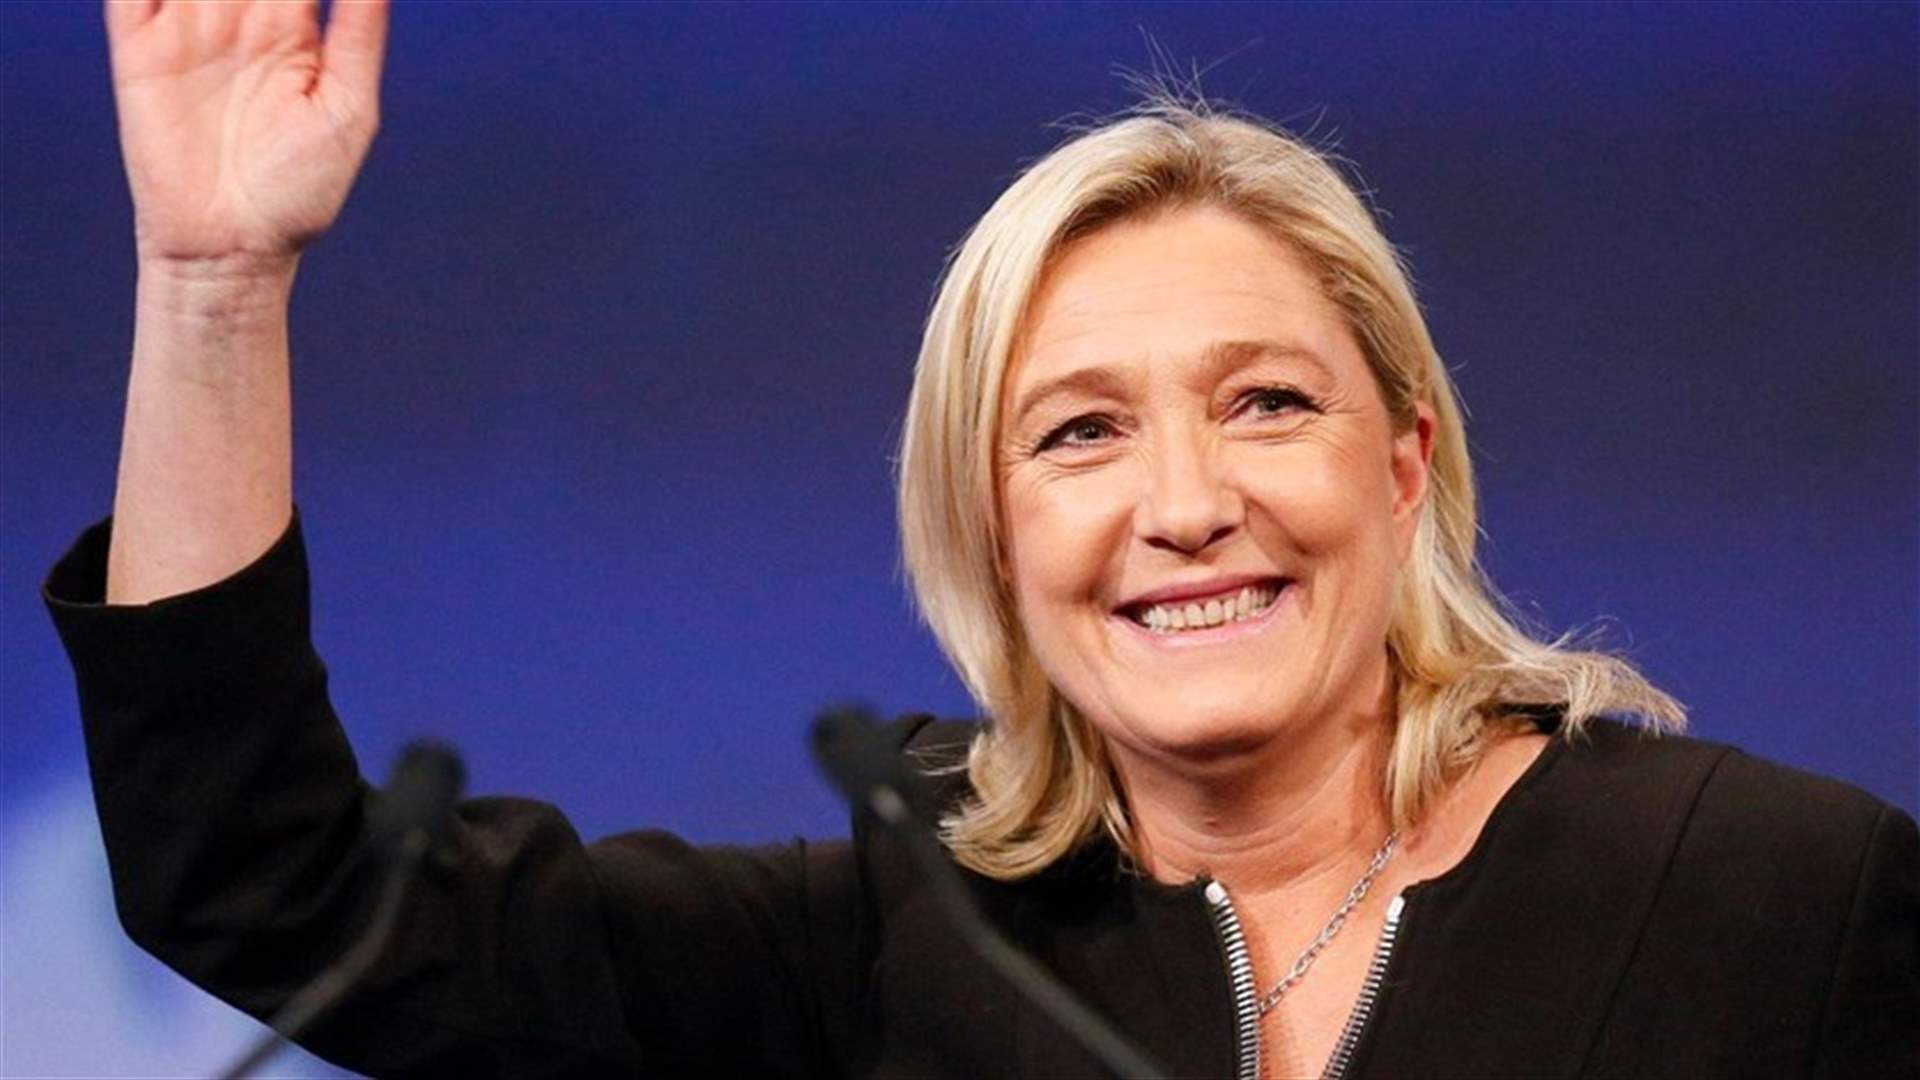 French presidential candidate Marine Le Pen arrives in Beirut